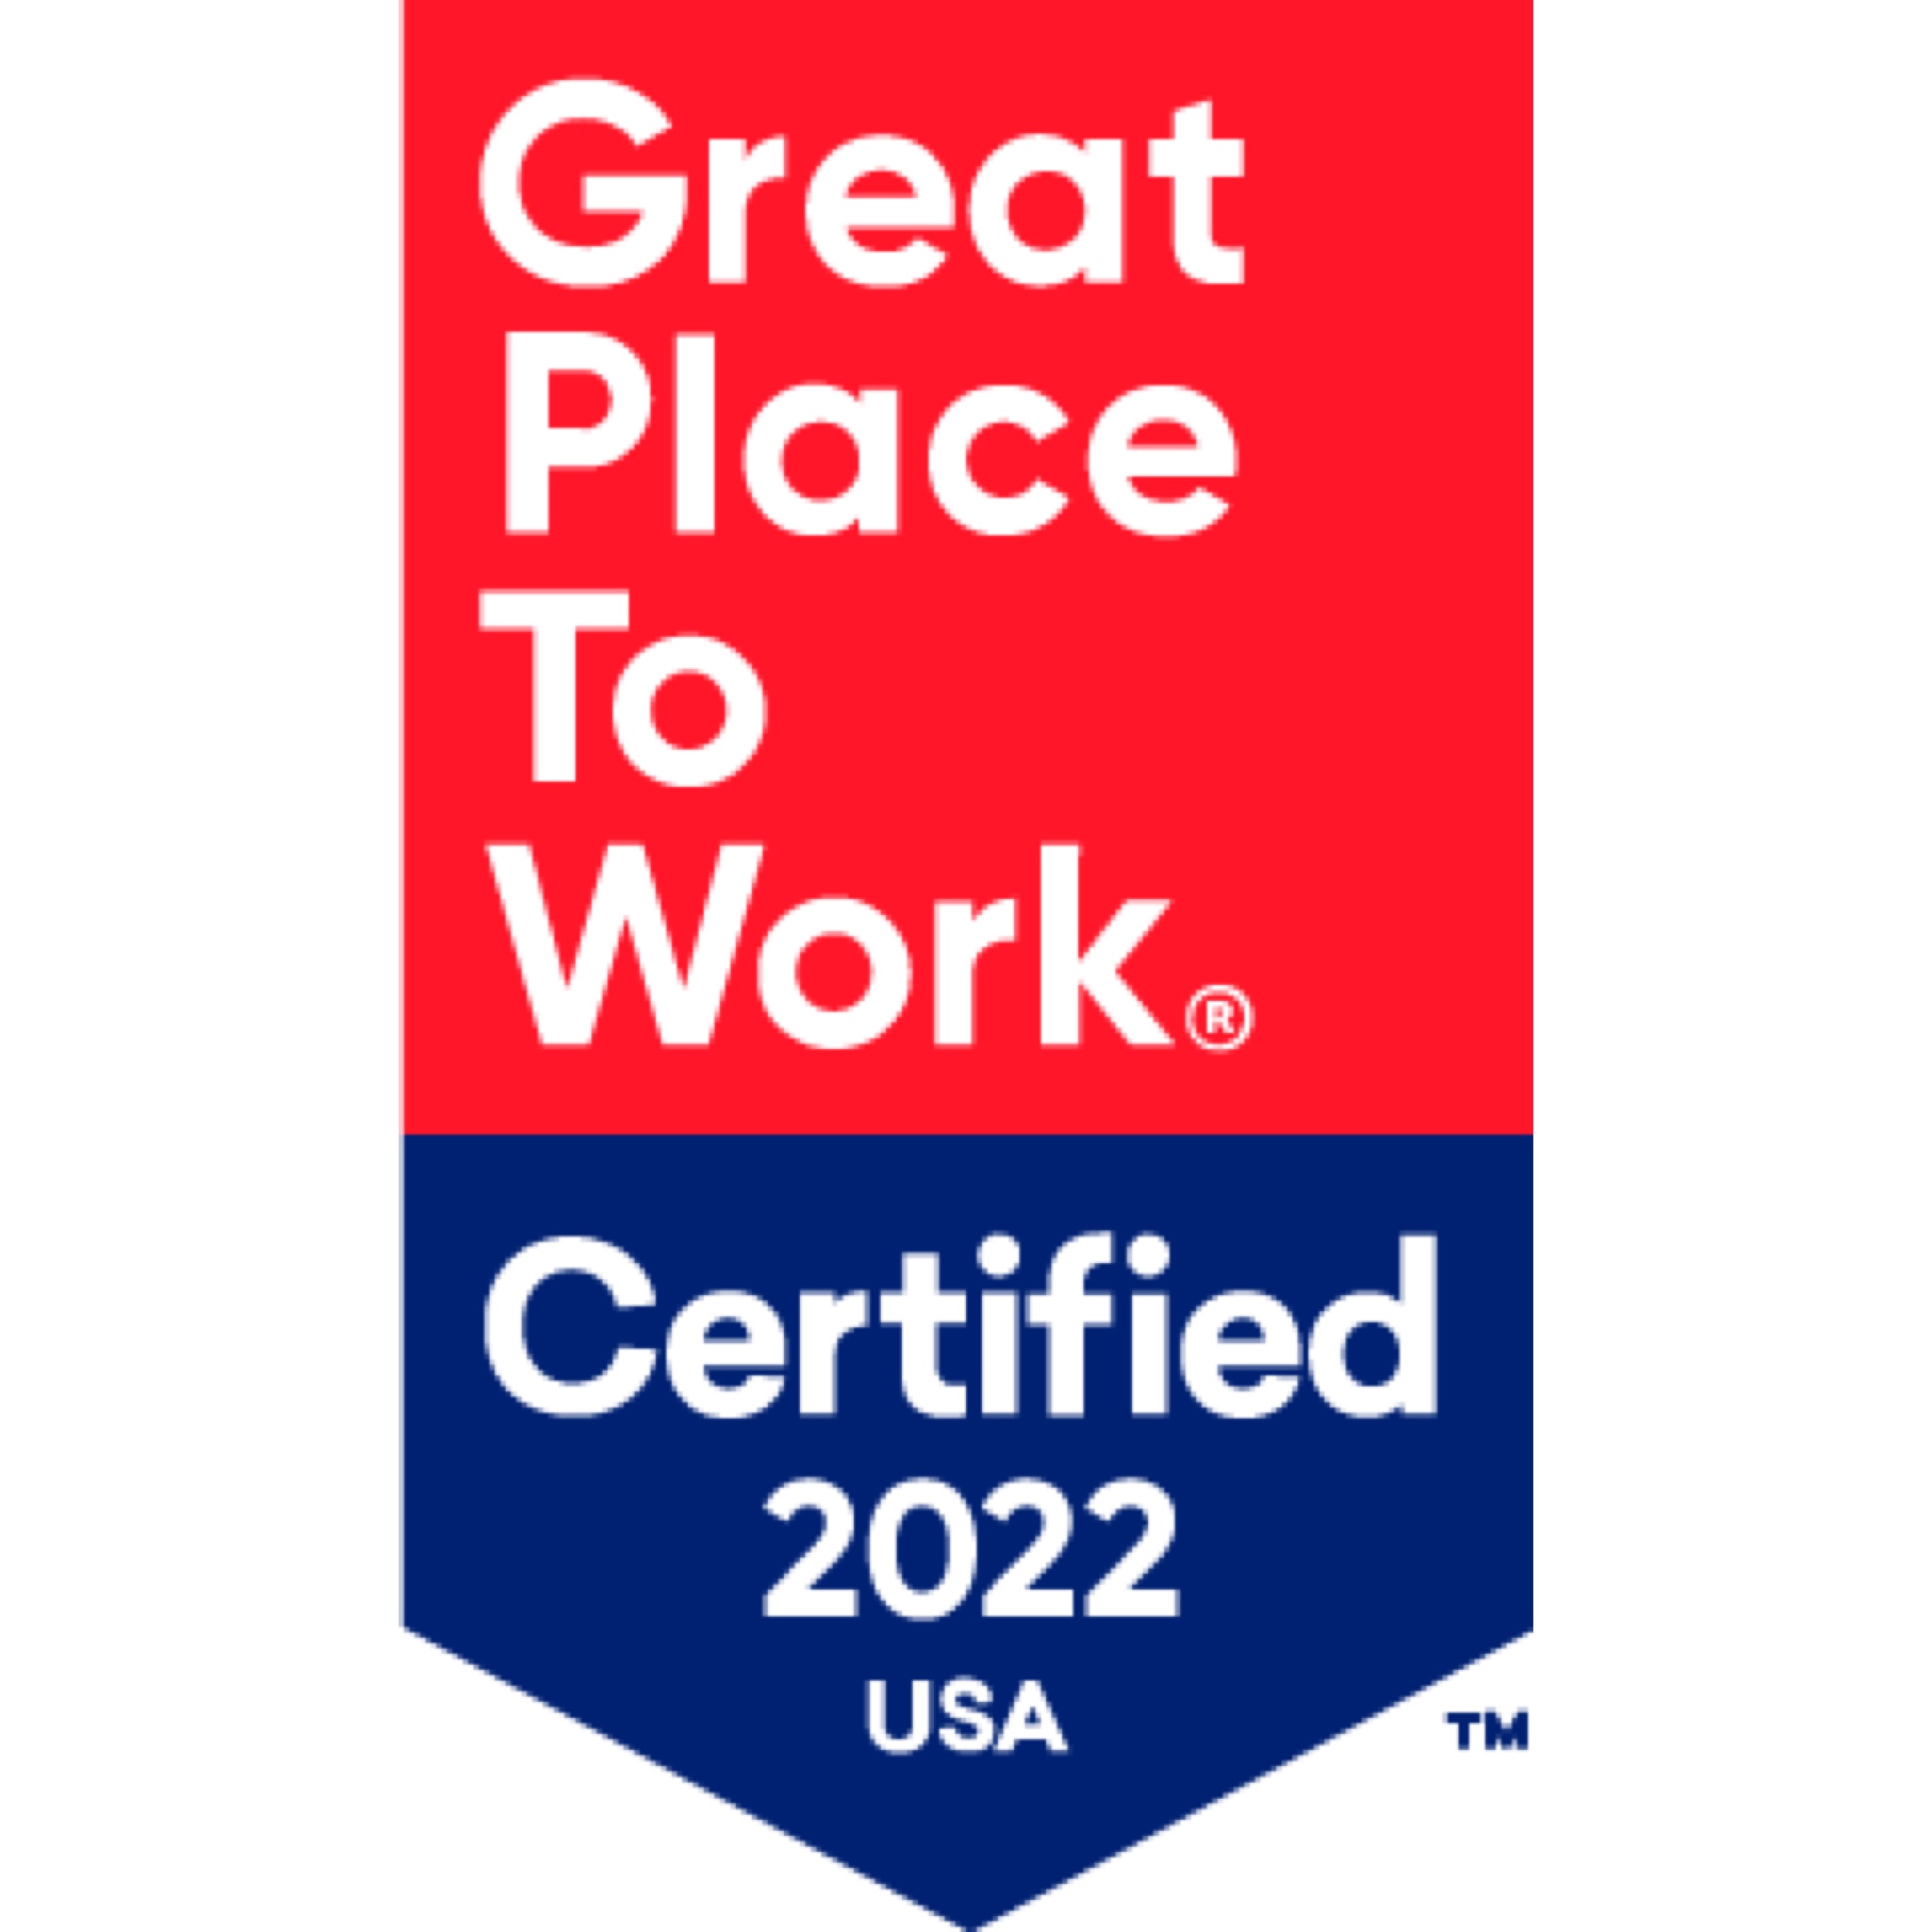 United States agency Altered State Productions wins Great Places to Work - Certified 2022 USA award